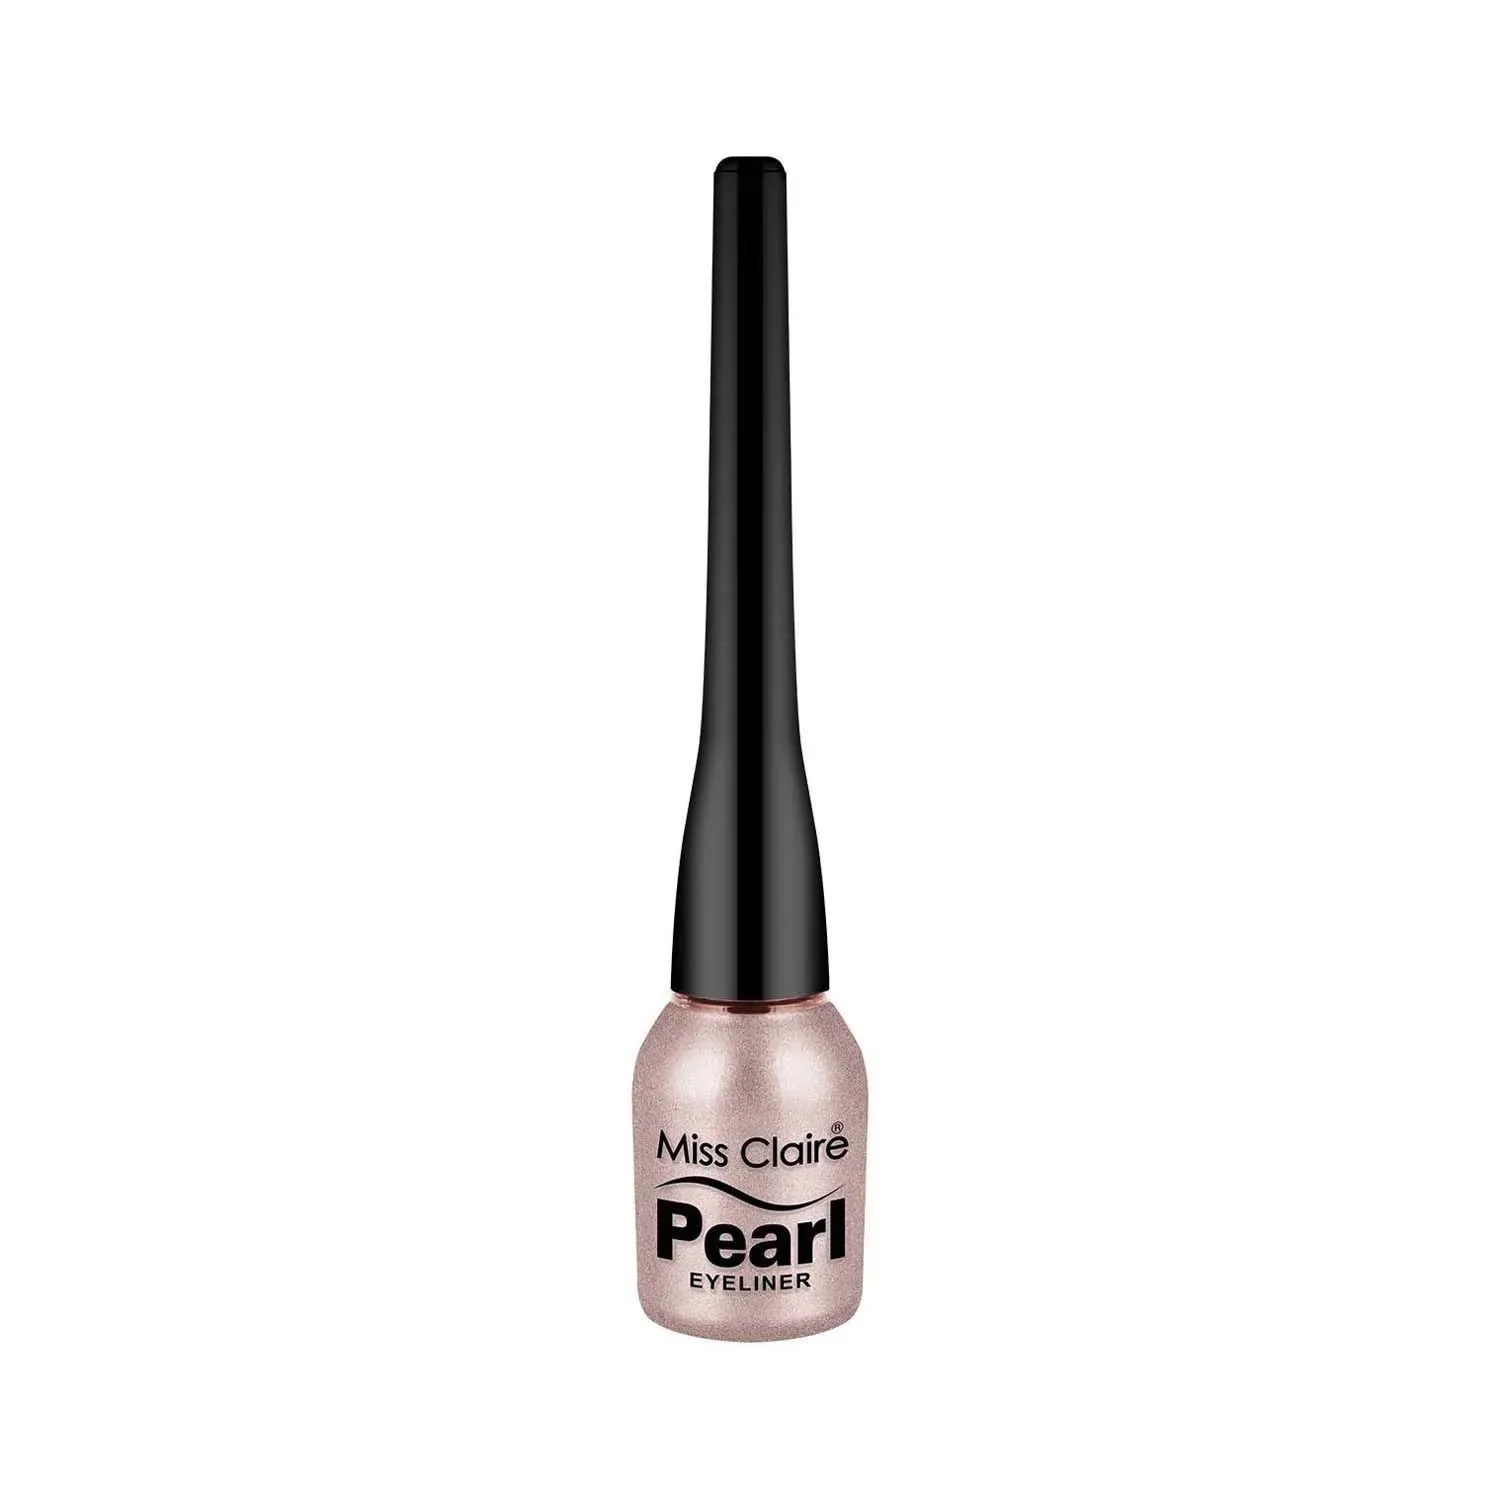 Miss Claire | Miss Claire Pearl Eyeliner - 18 Shimmer Pink (5g)